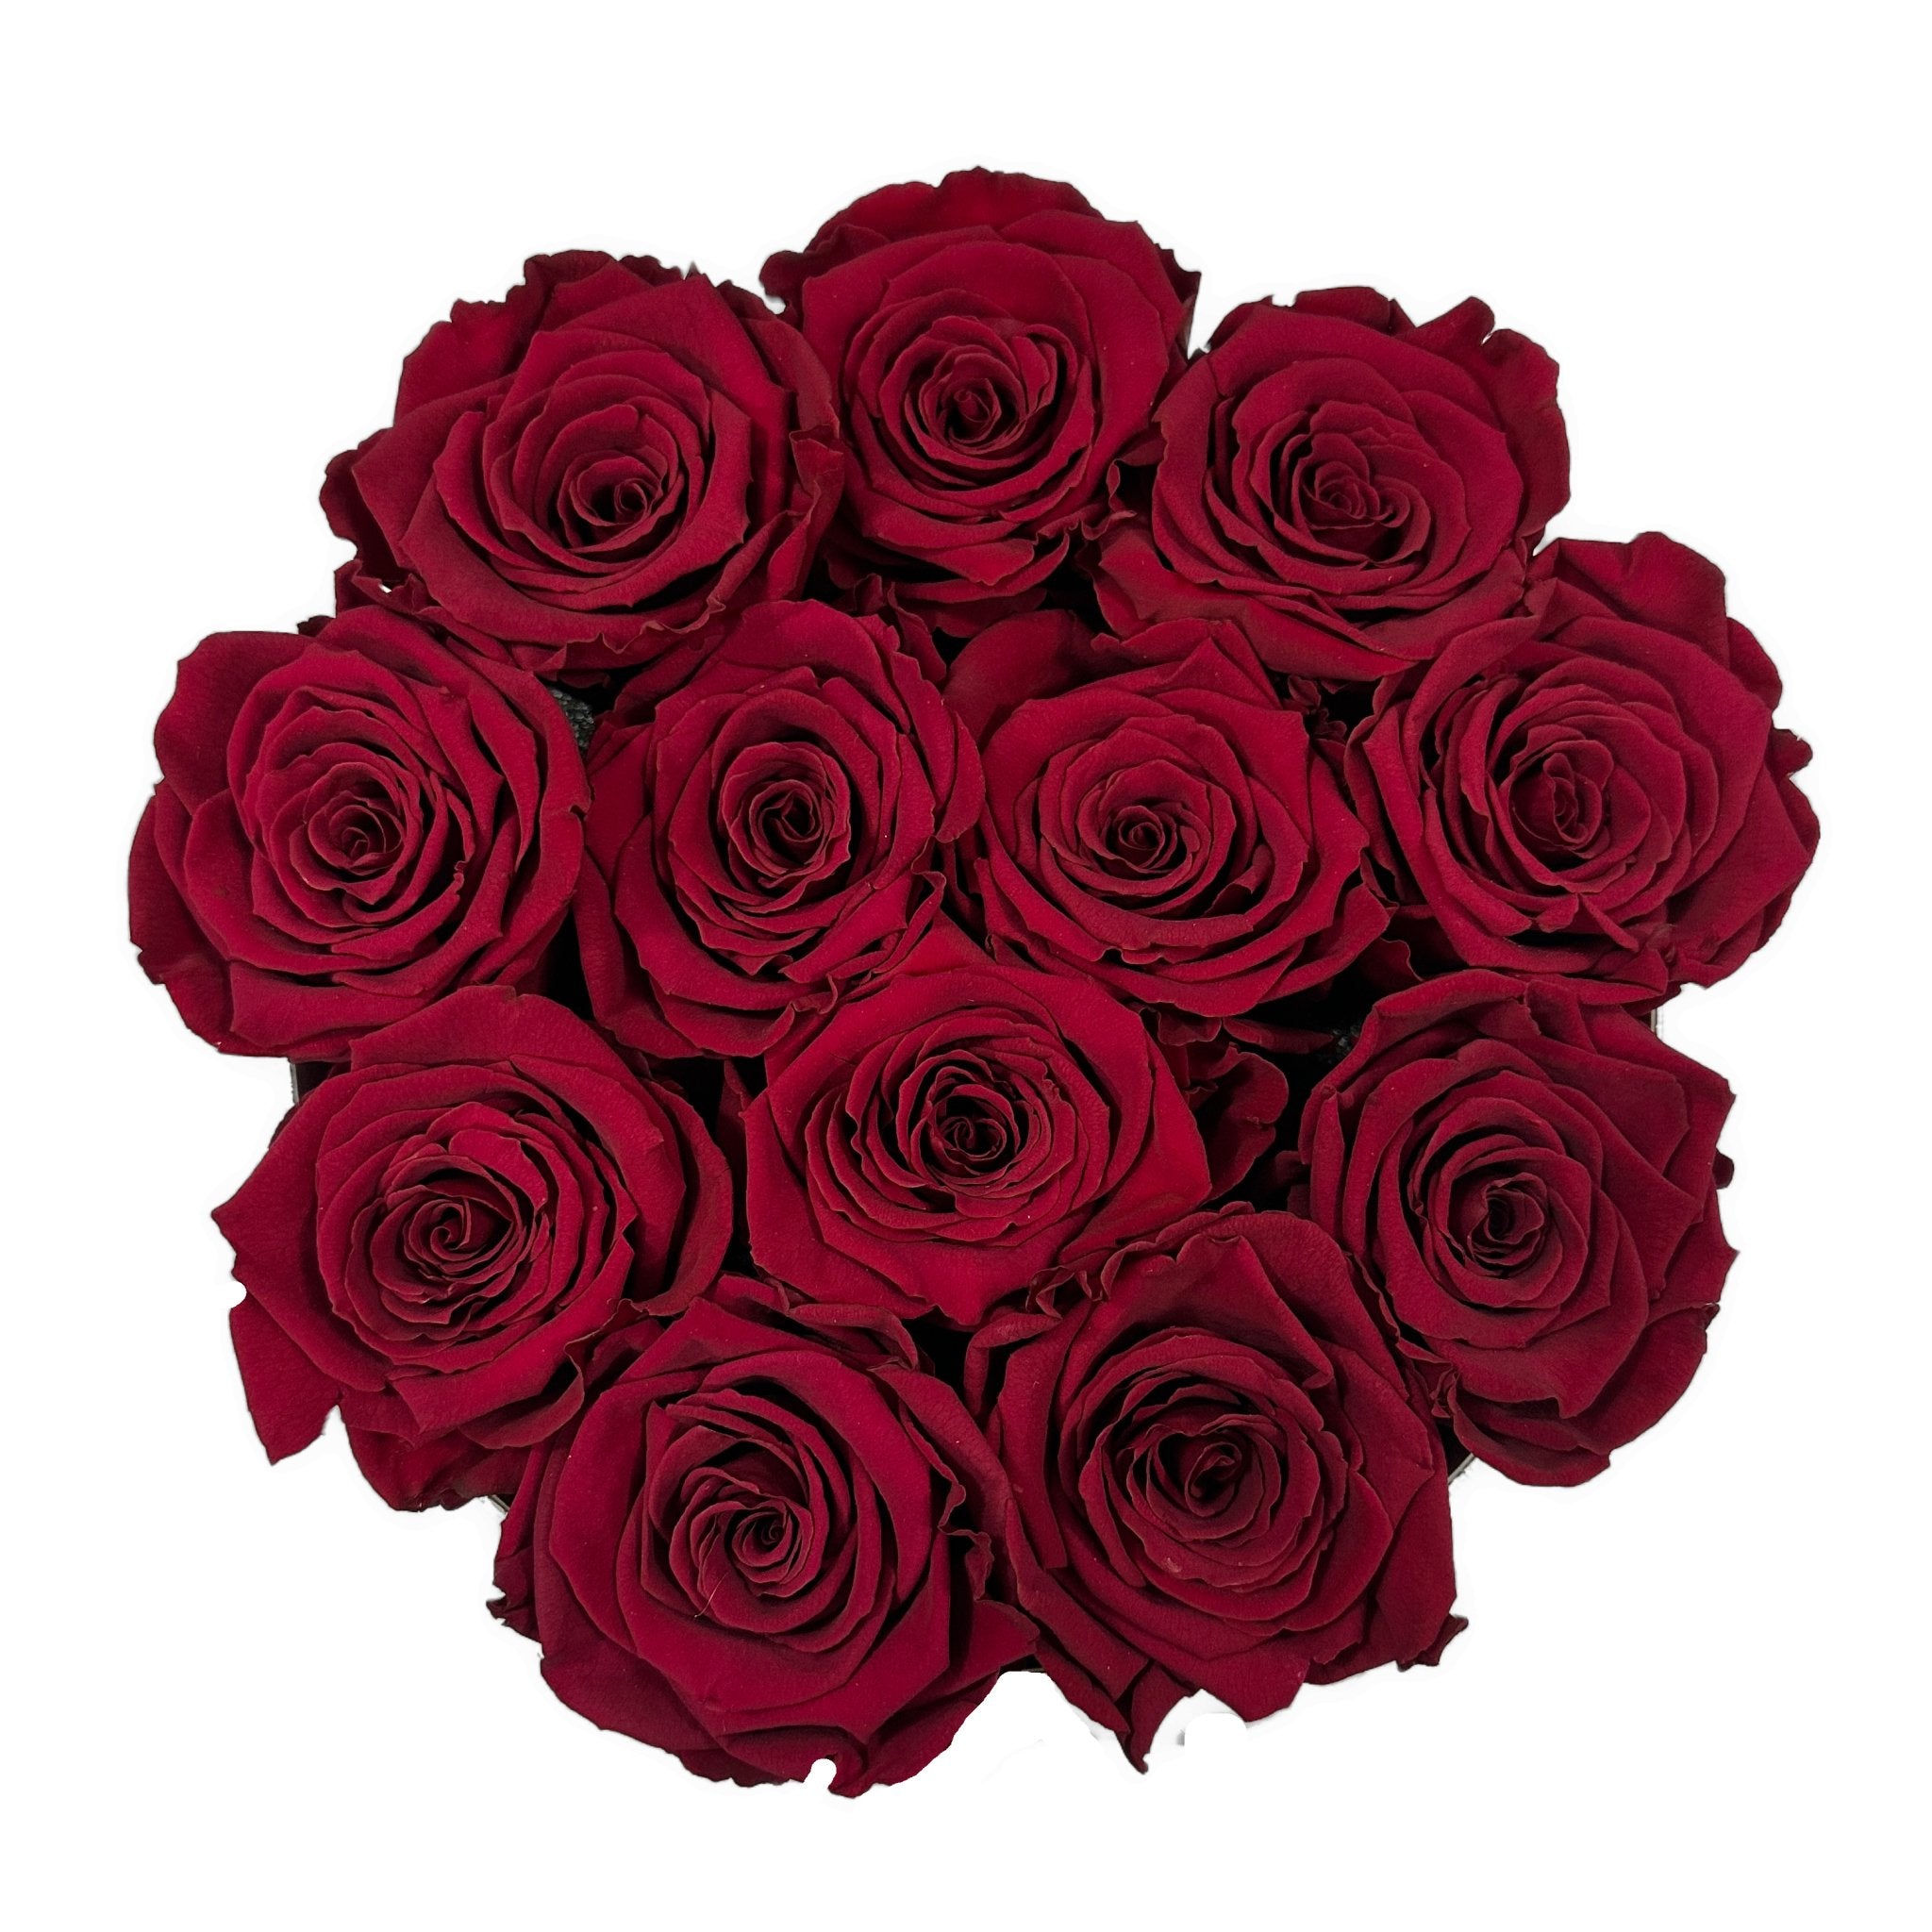 Large Classic White Forever Rose Box - Red Red Wine Eternal Roses - Jednay Roses